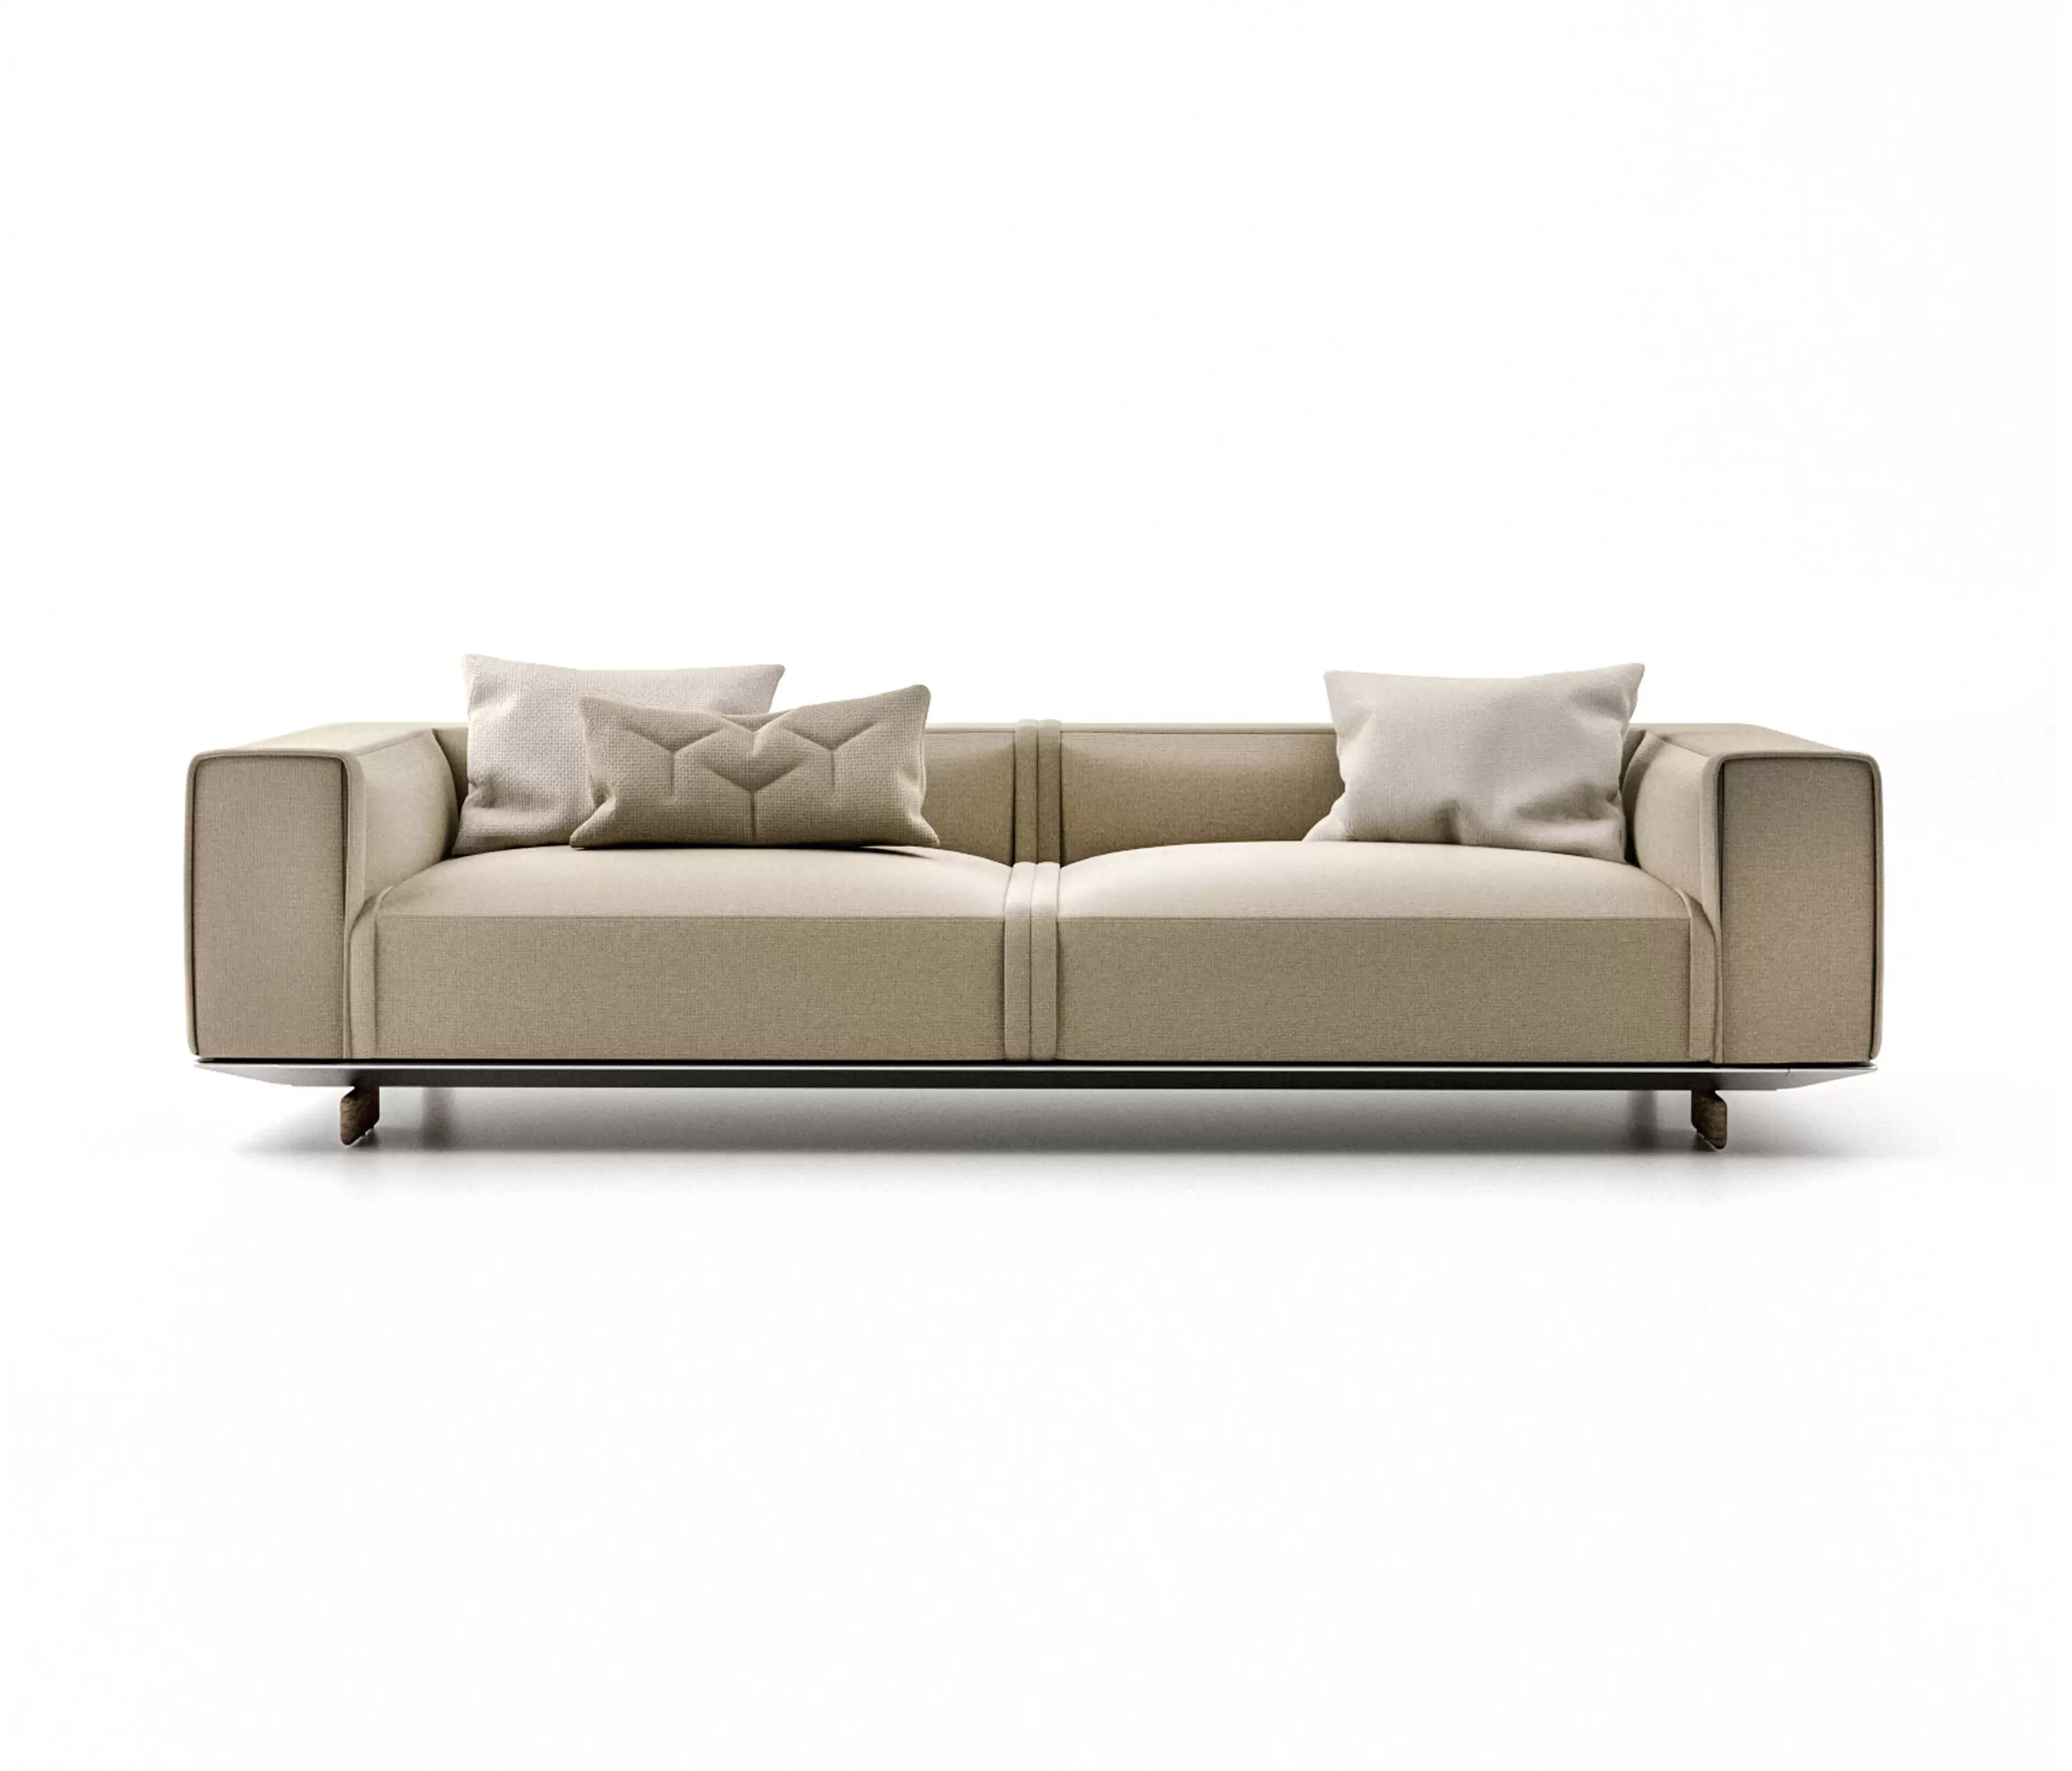 COLEMAN 2 SEATER SOFA BED WITH REMOVABLE COVER